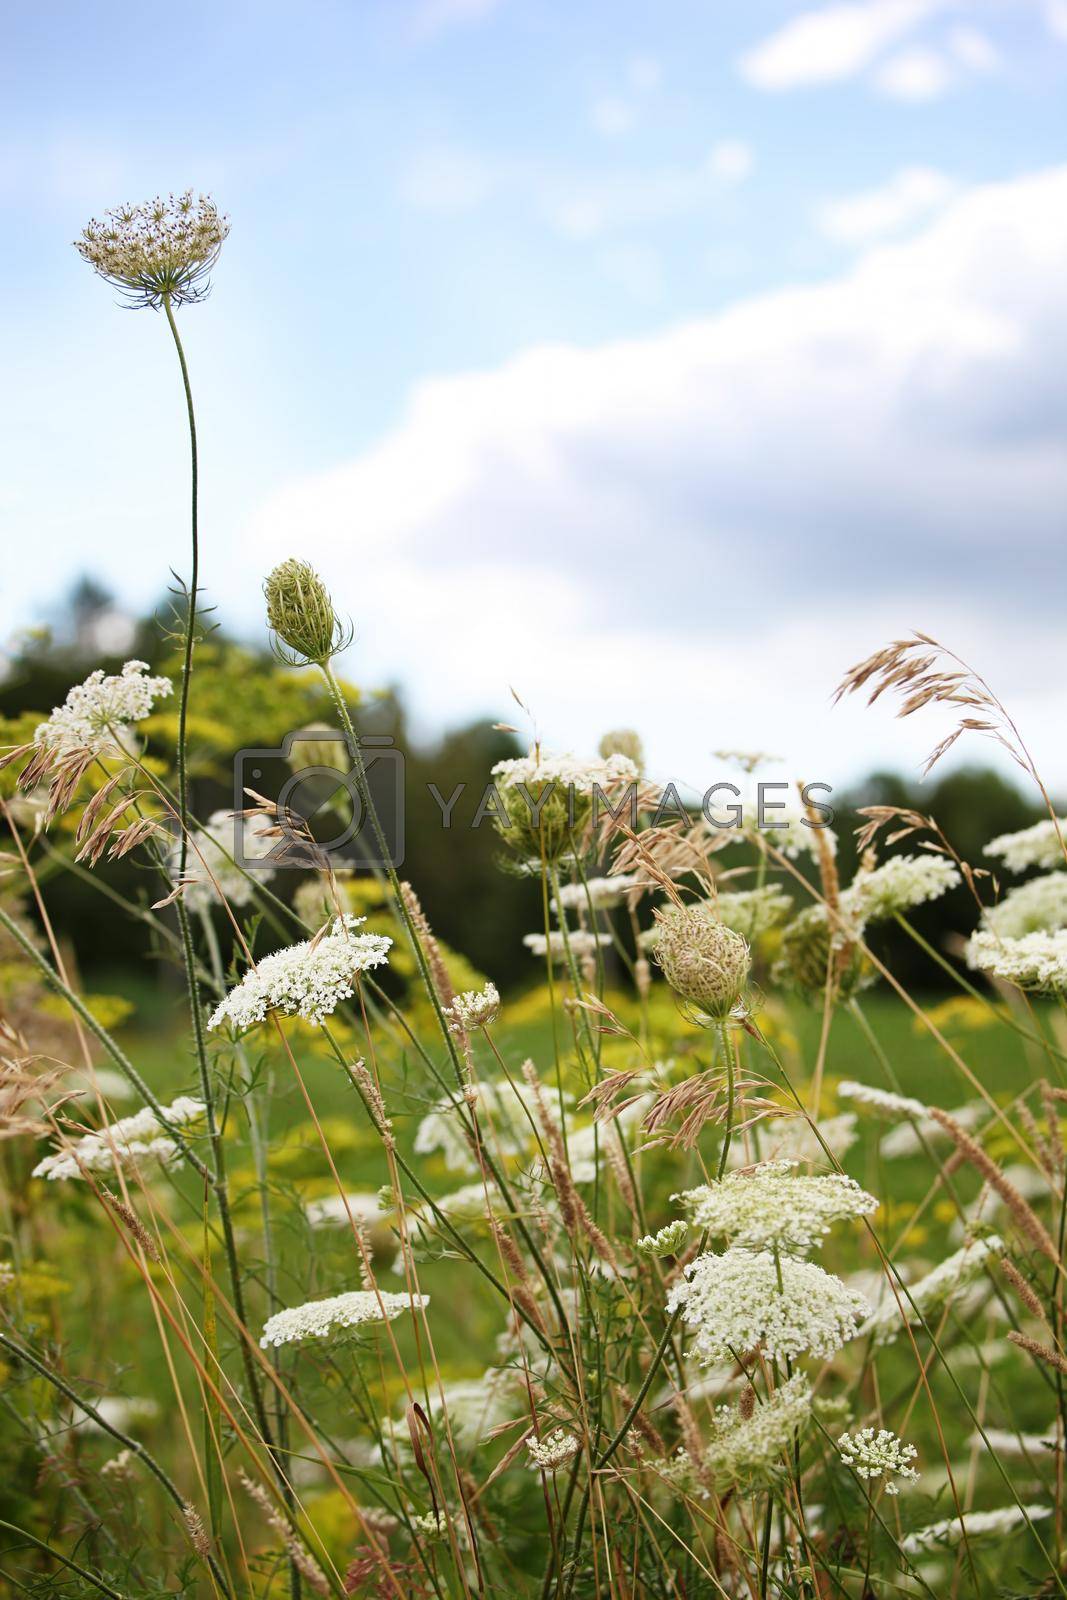 Royalty free image of Queen Anne’s lace flowers with wildflowers in field by Sandralise